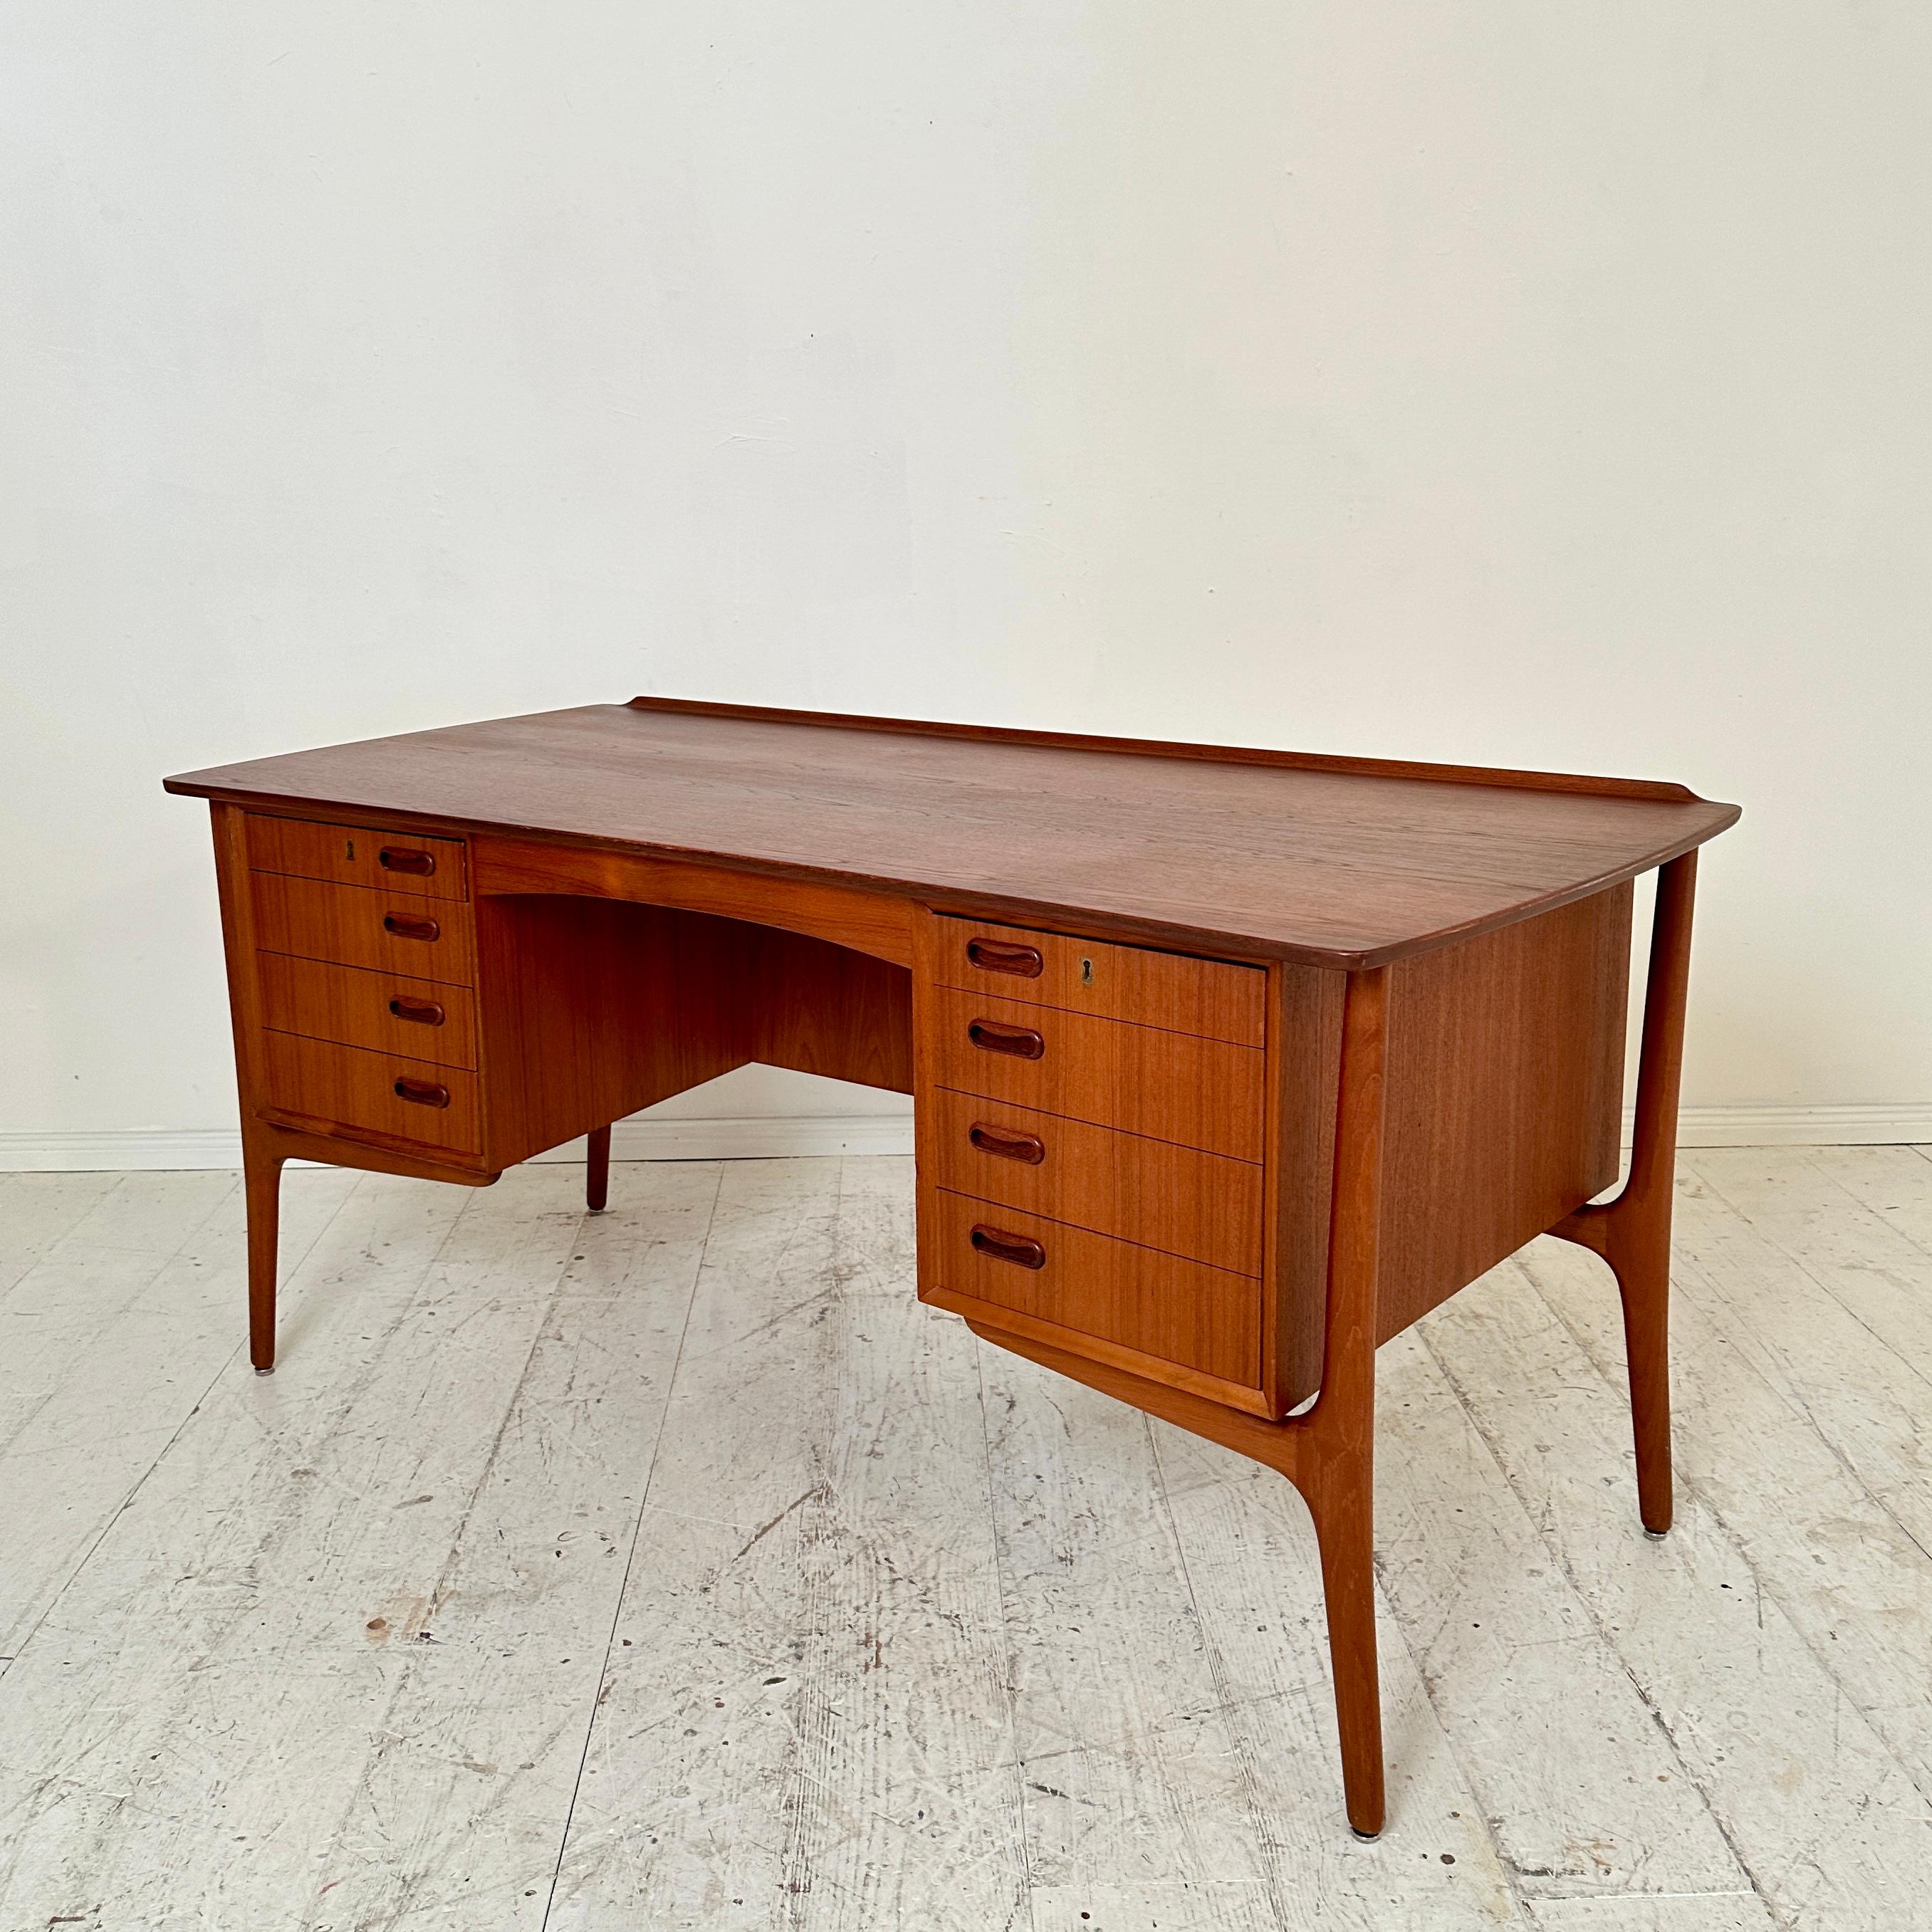 Crafted circa 1960, the Mid Century Teak Desk by Svend Aage Madsen for H.P. Hansen stands as an epitome of Danish modern design. Madsen's meticulous craftsmanship and H.P. Hansen's legacy converge in this iconic piece, showcasing the era's emphasis